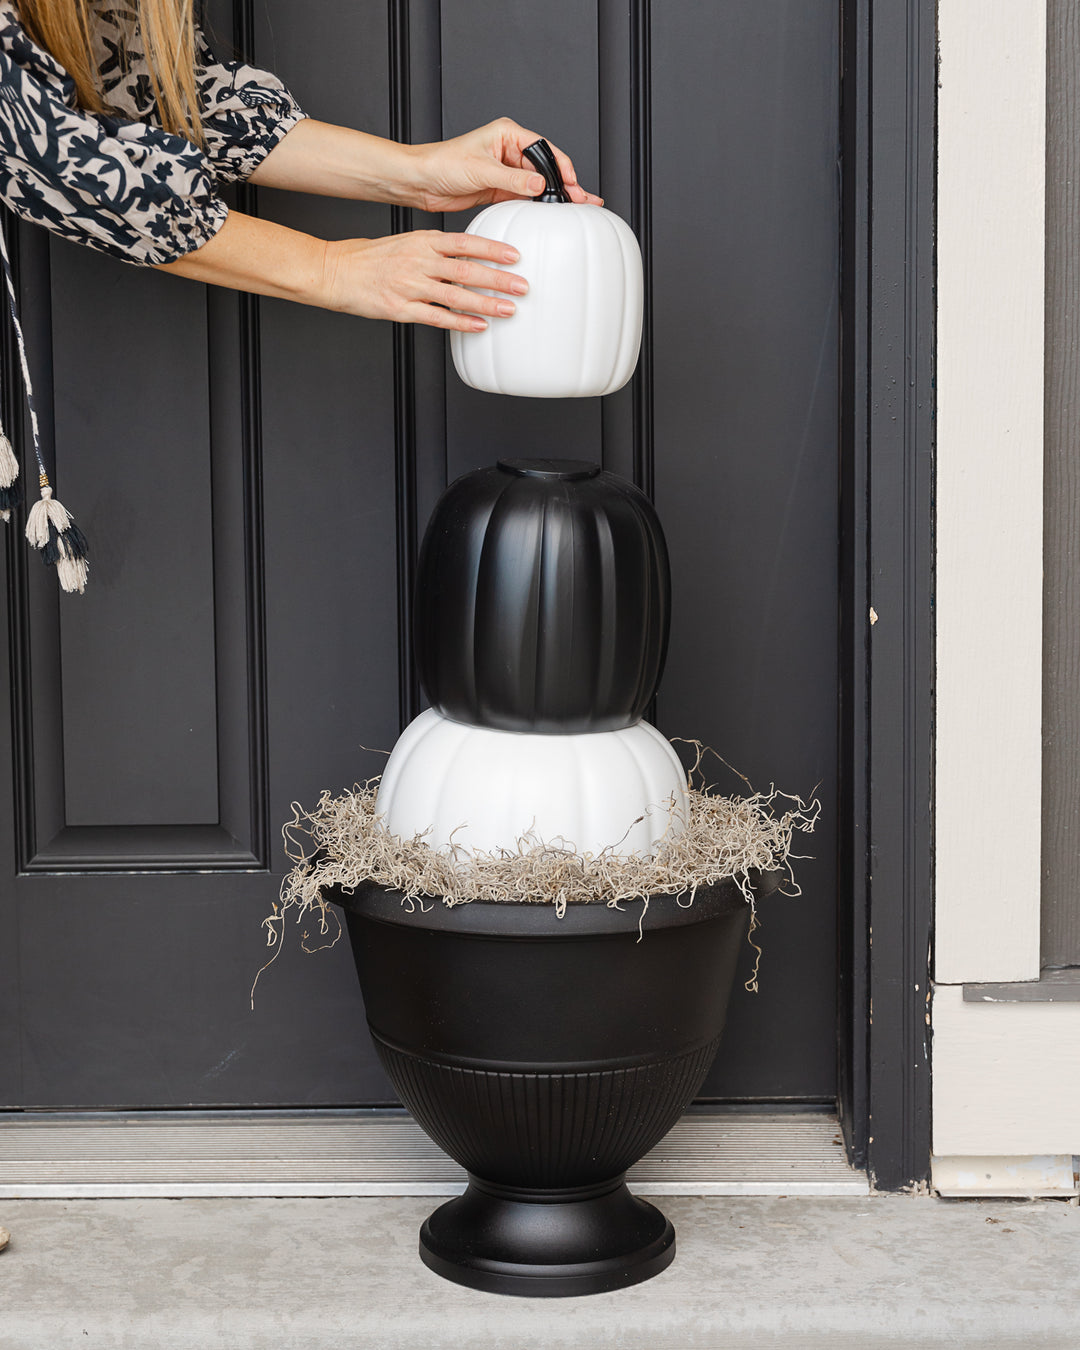 Black and white pumpkins as outdoor Halloween decorations